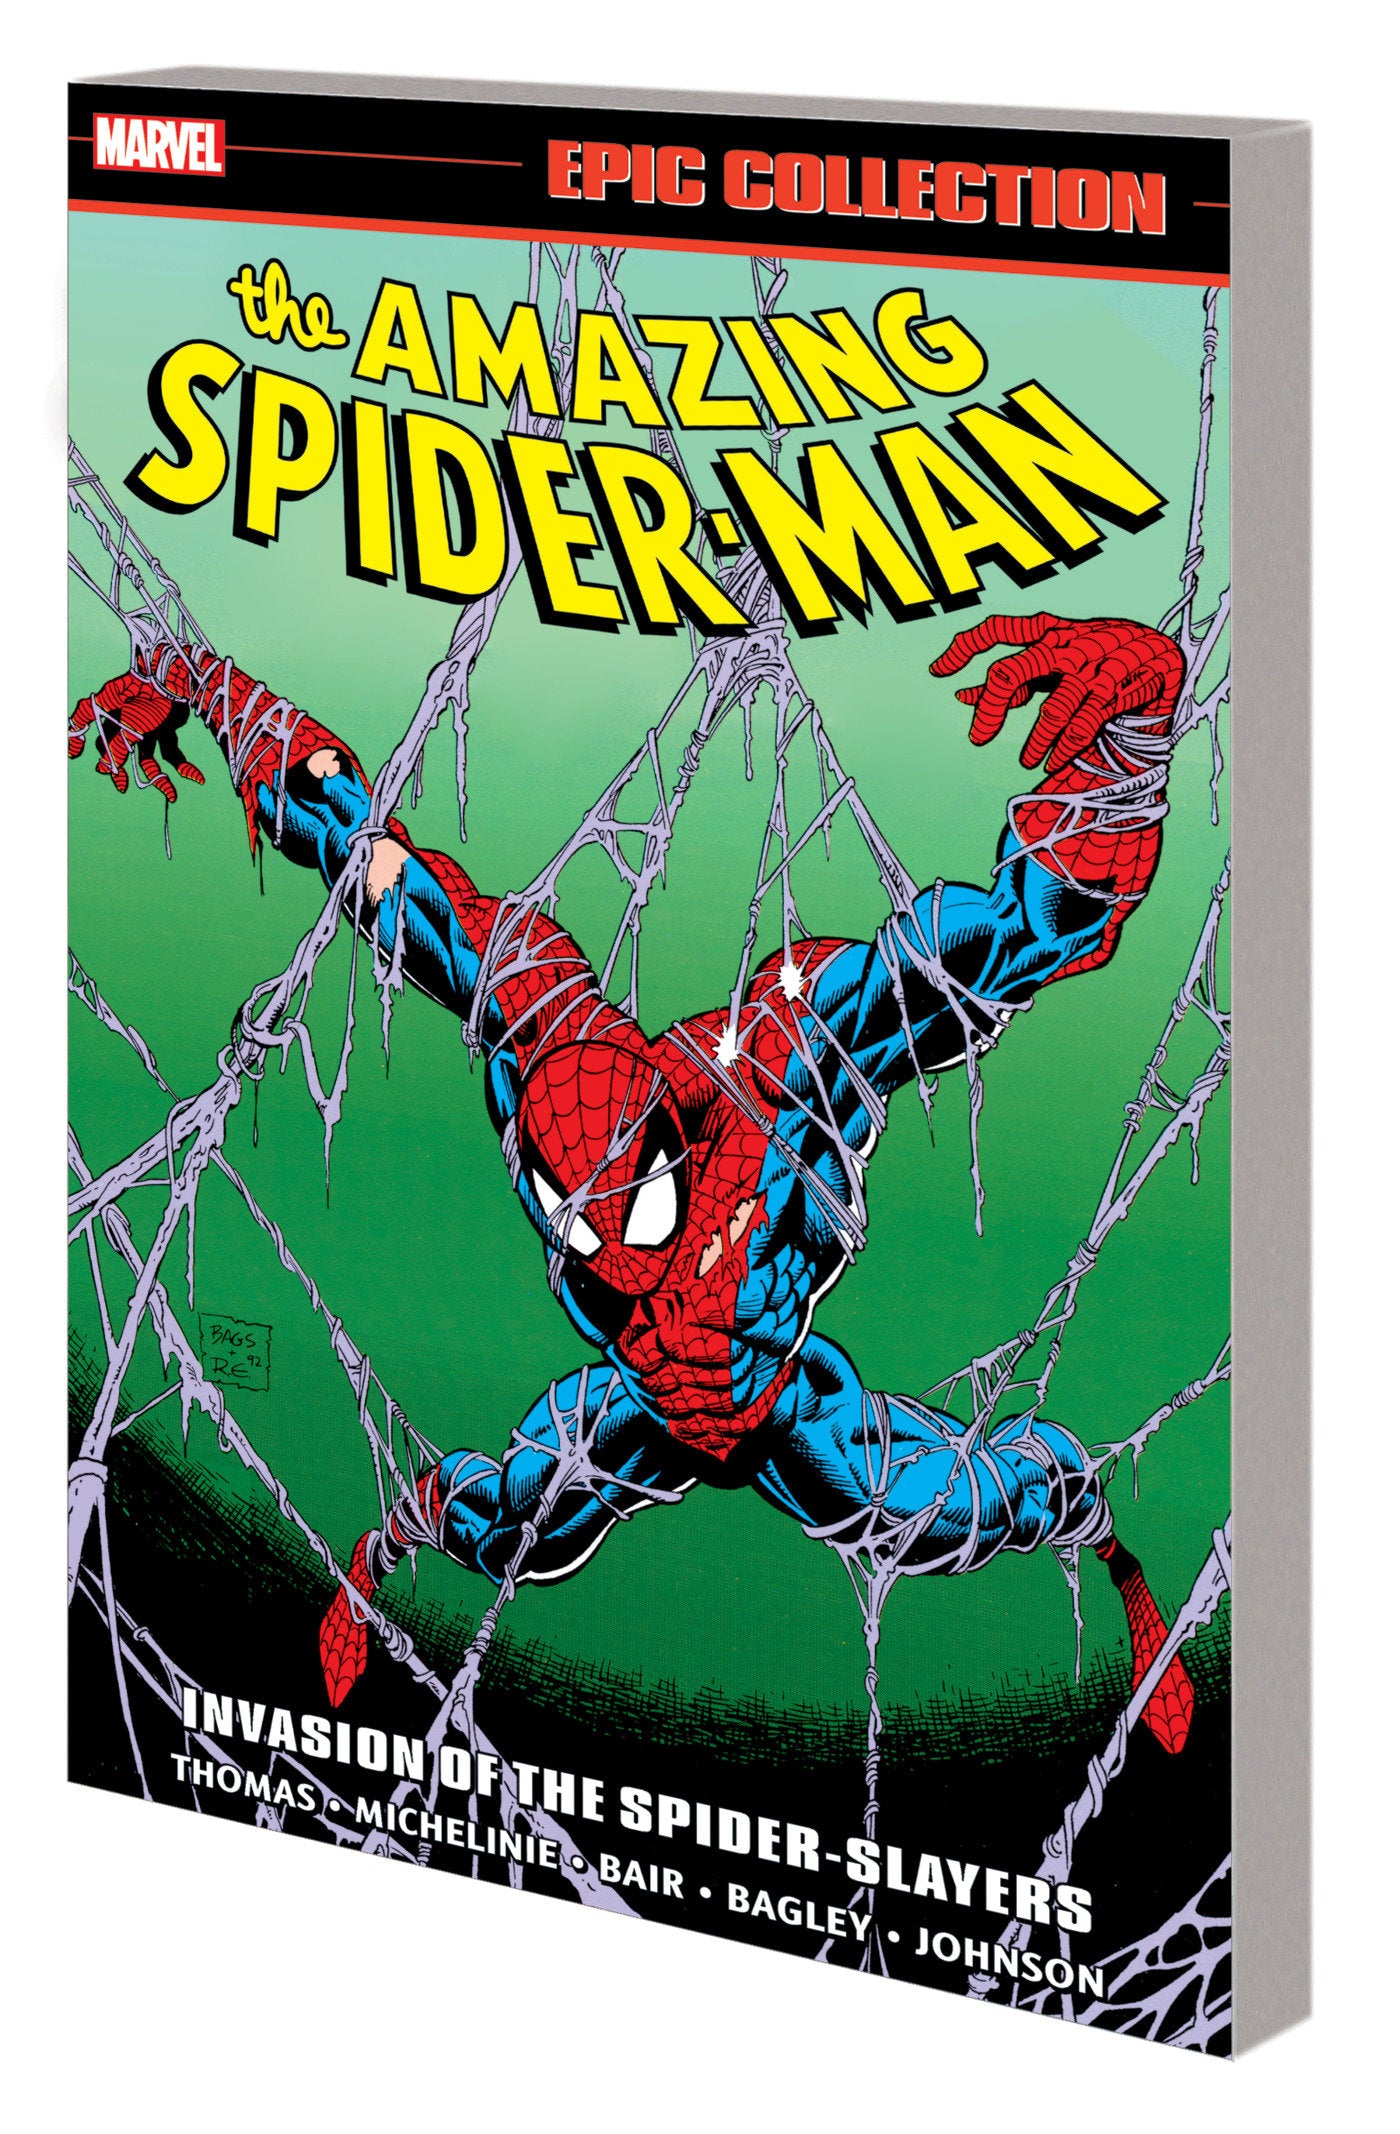 AMAZING SPIDER-MAN EPIC COLLECTION: INVASION OF THE SPIDER-SLAYERS TRADE PAPERBACK